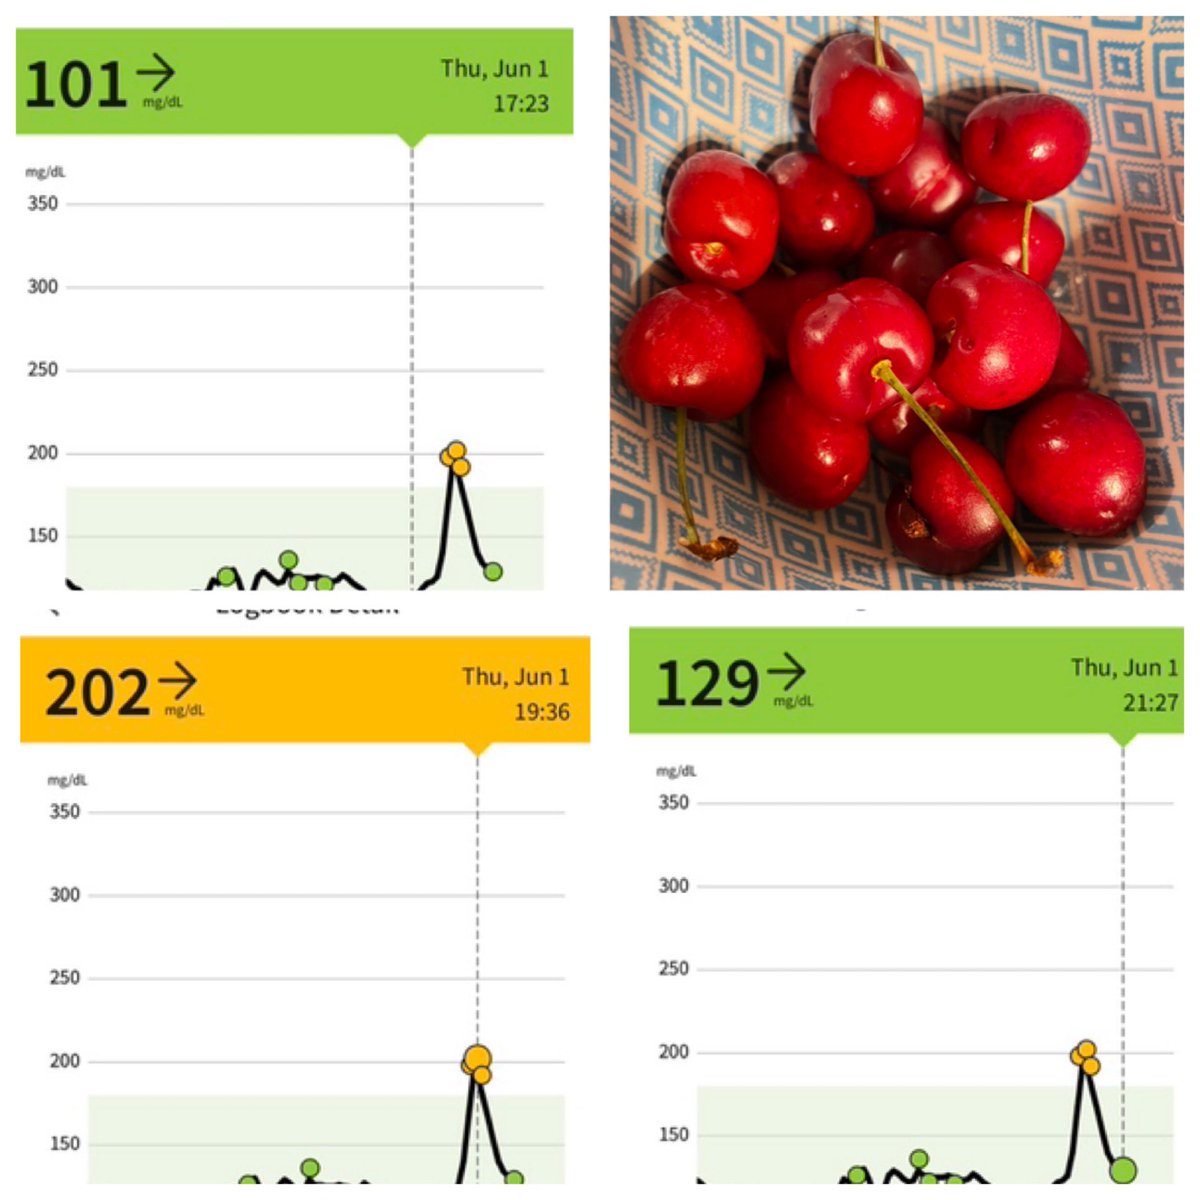 Think twice before grabbing that snack or dessert fruits aren’t benign;
 8 cherries raised my blood glucose levels 2x within 2 hours and took another 2 hours to come back to normal. 
.
#keto #ketogenic #ketodiet #ketomeals #foodismedicine #lowcarb #intuitivedoc #lifestylealkmy